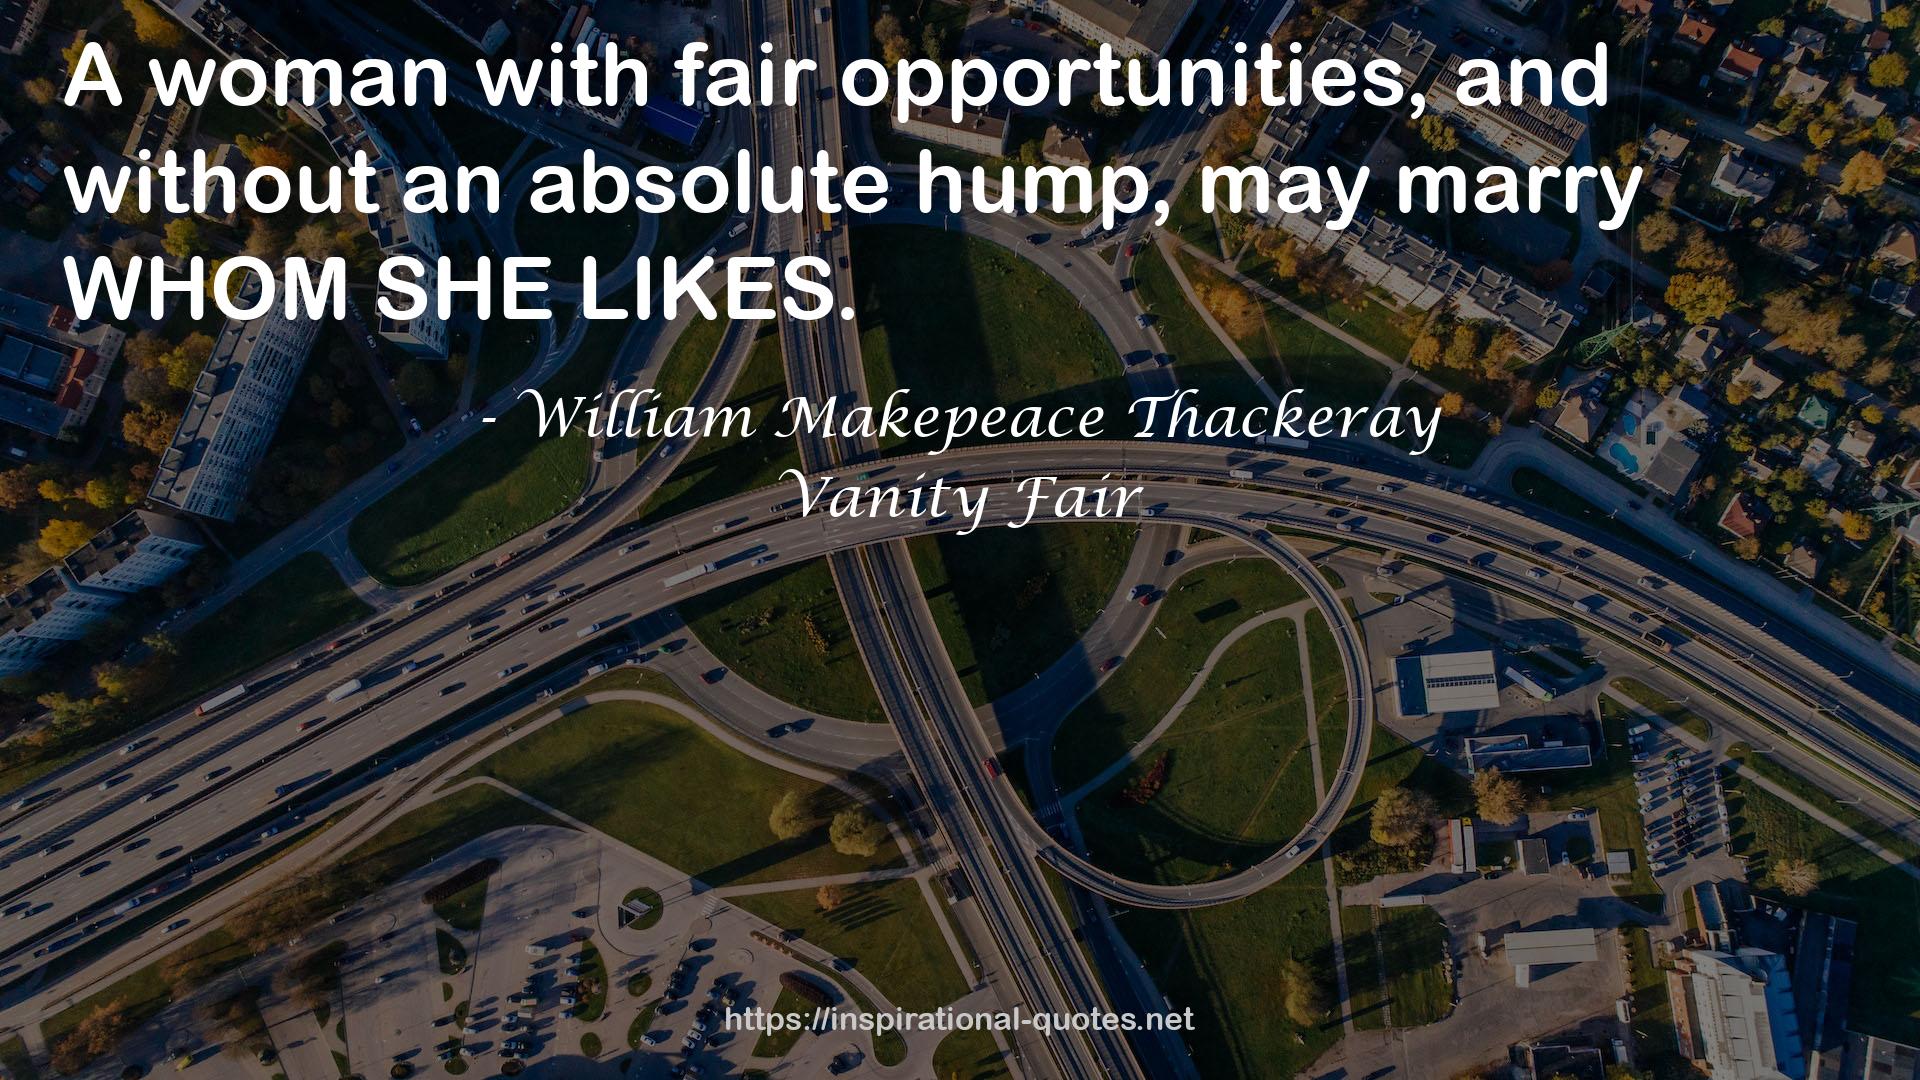 William Makepeace Thackeray QUOTES